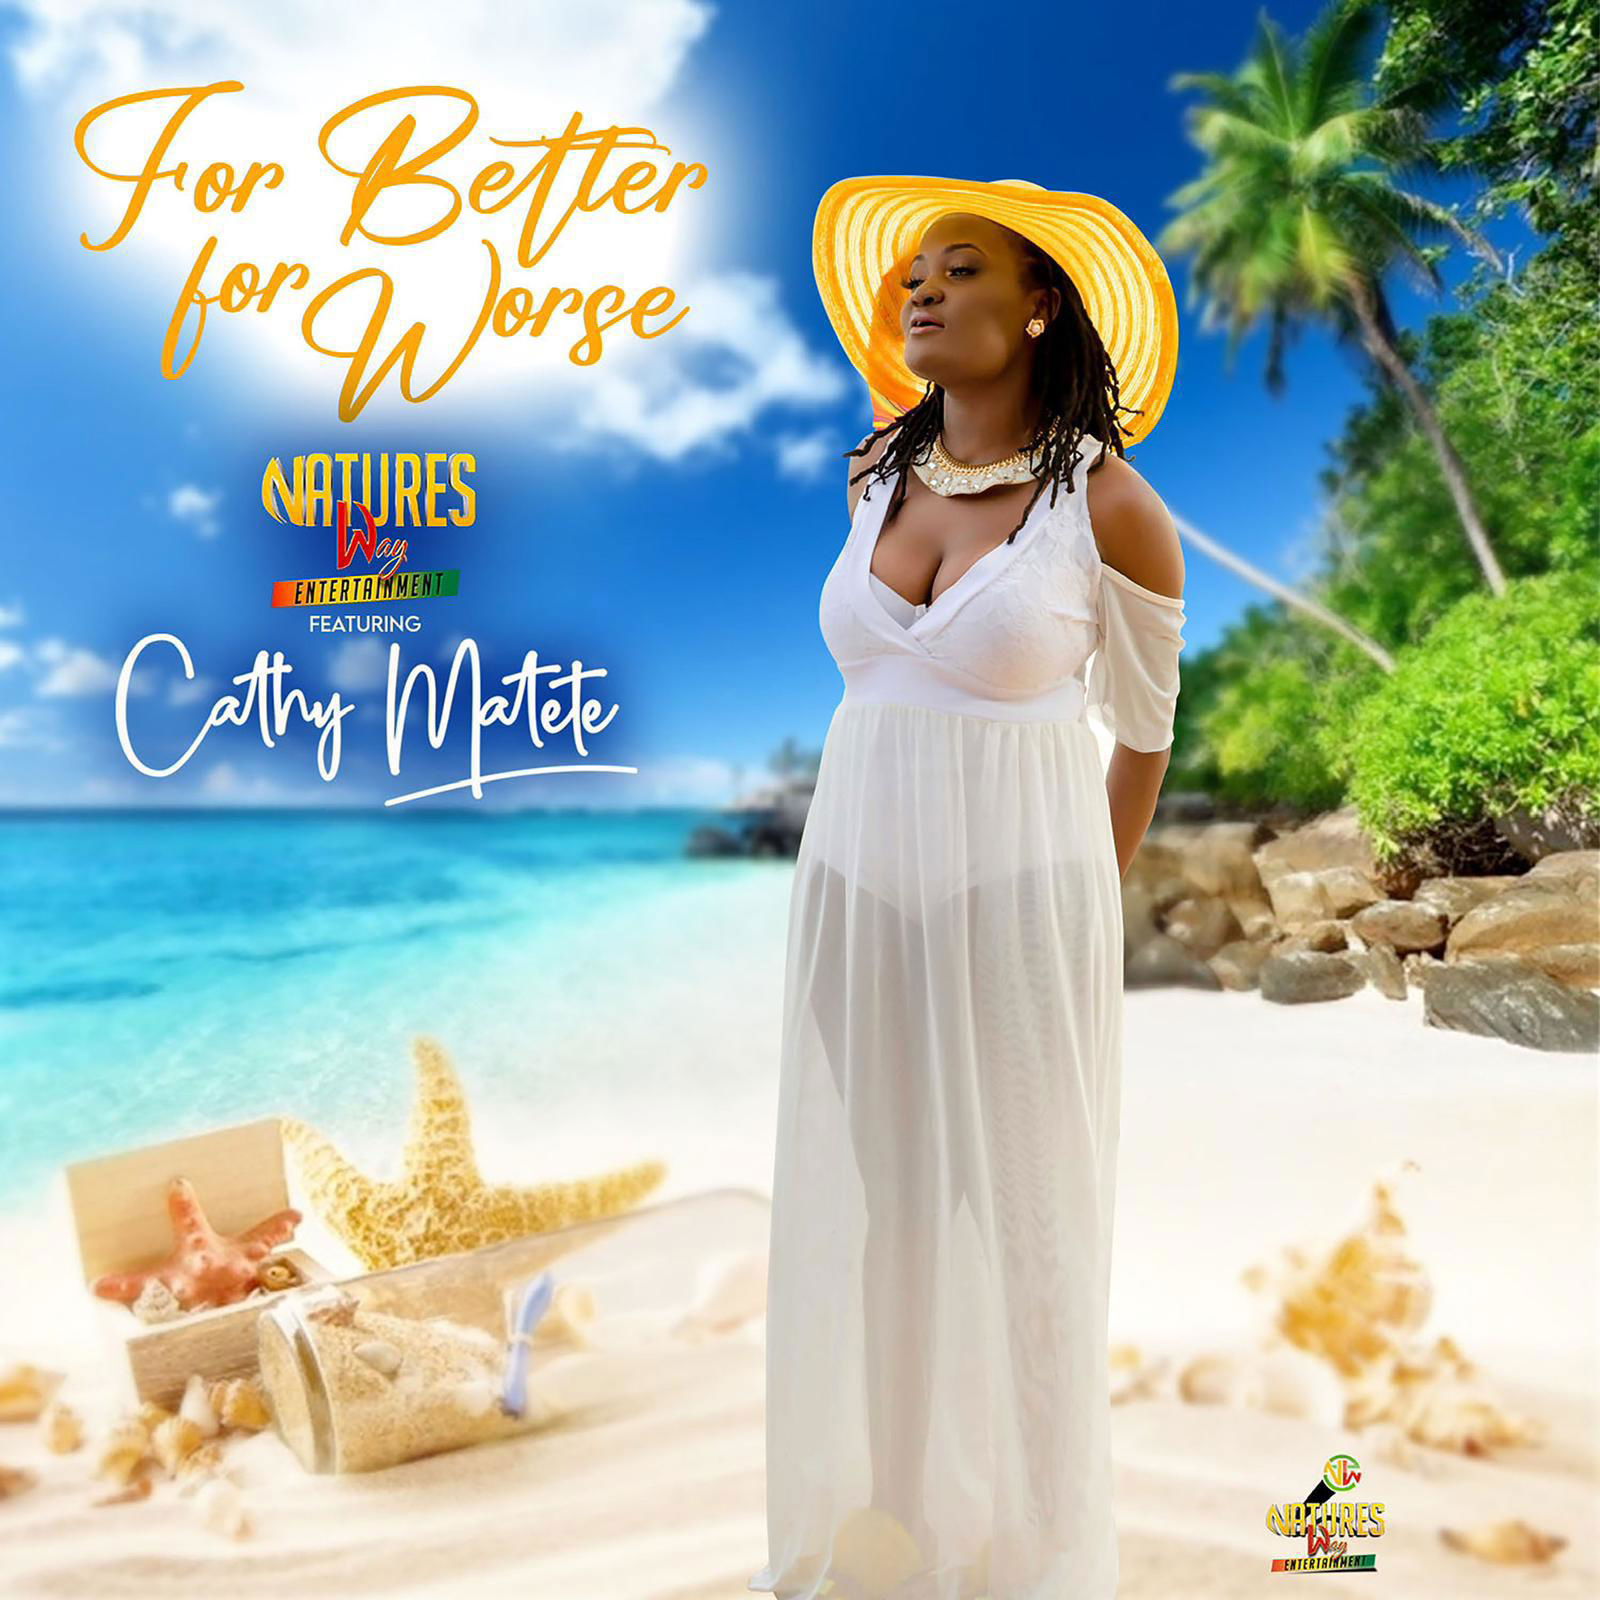 Kenyan Singer-Songwriter Cathy Matete Returns With Captivating Visuals For Her New Single "For Better For Worse"